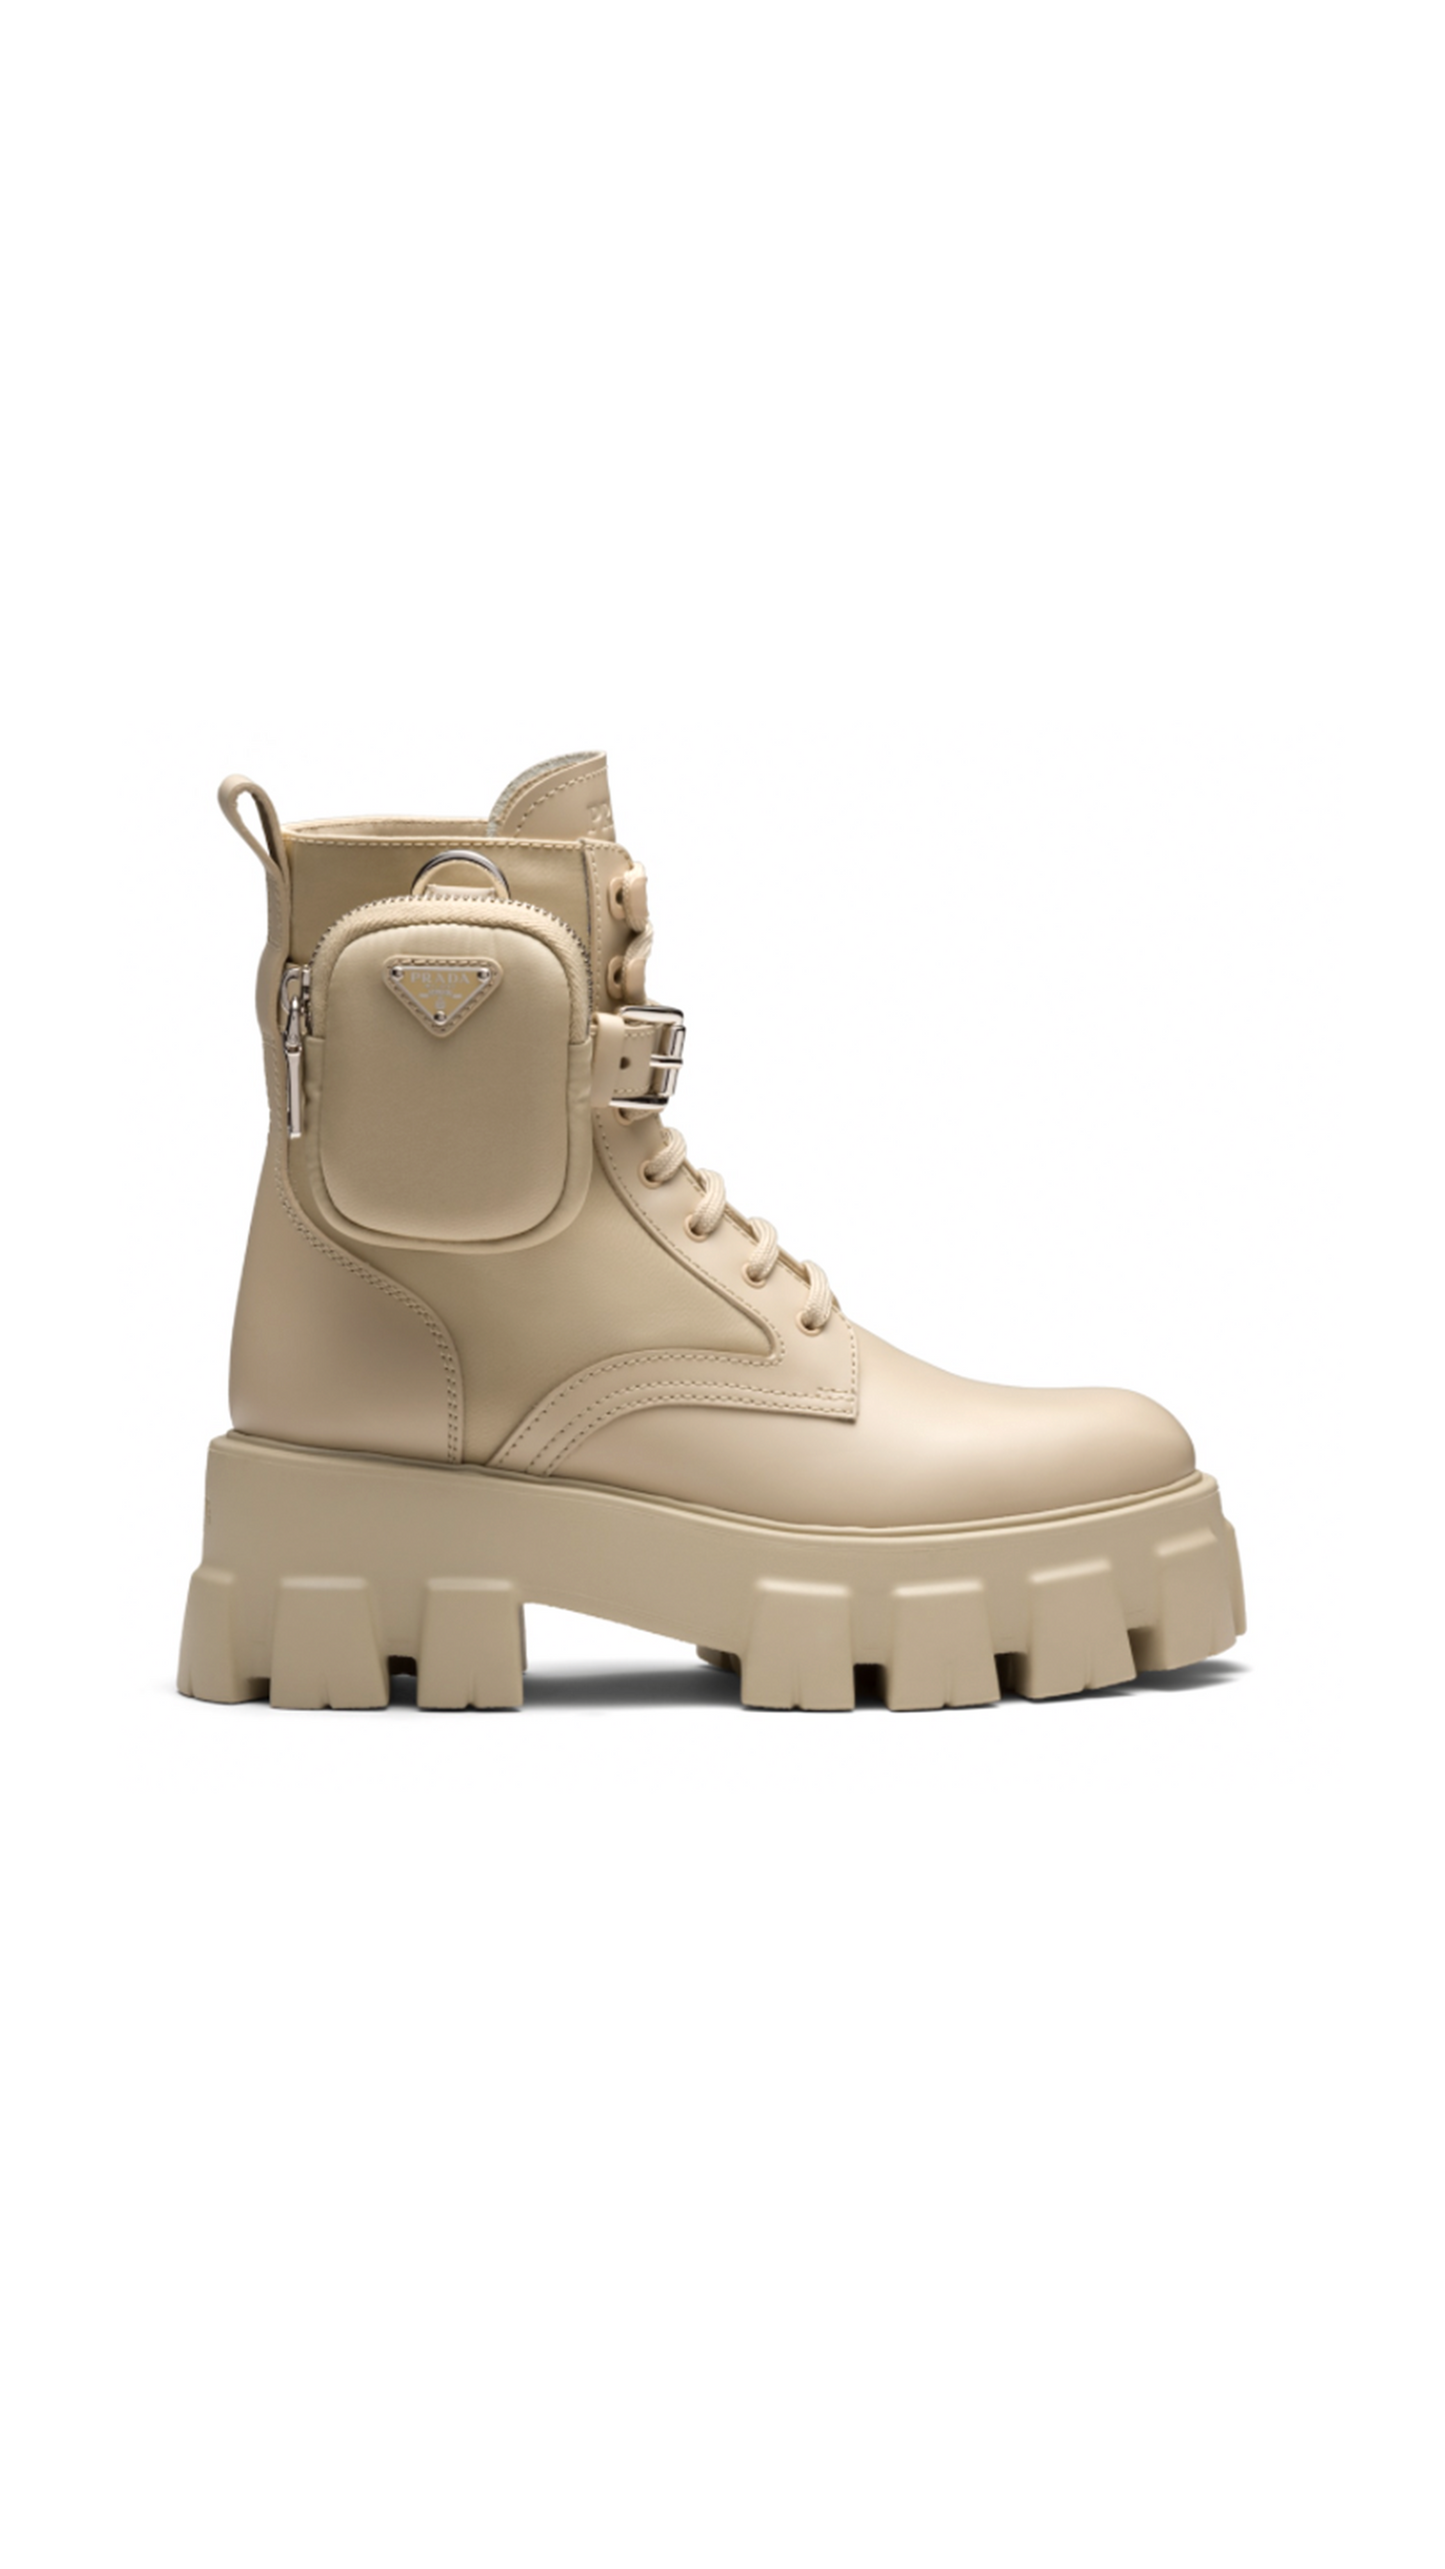 Monolith Leather and Nylon Fabric Boots - Dessert Beige